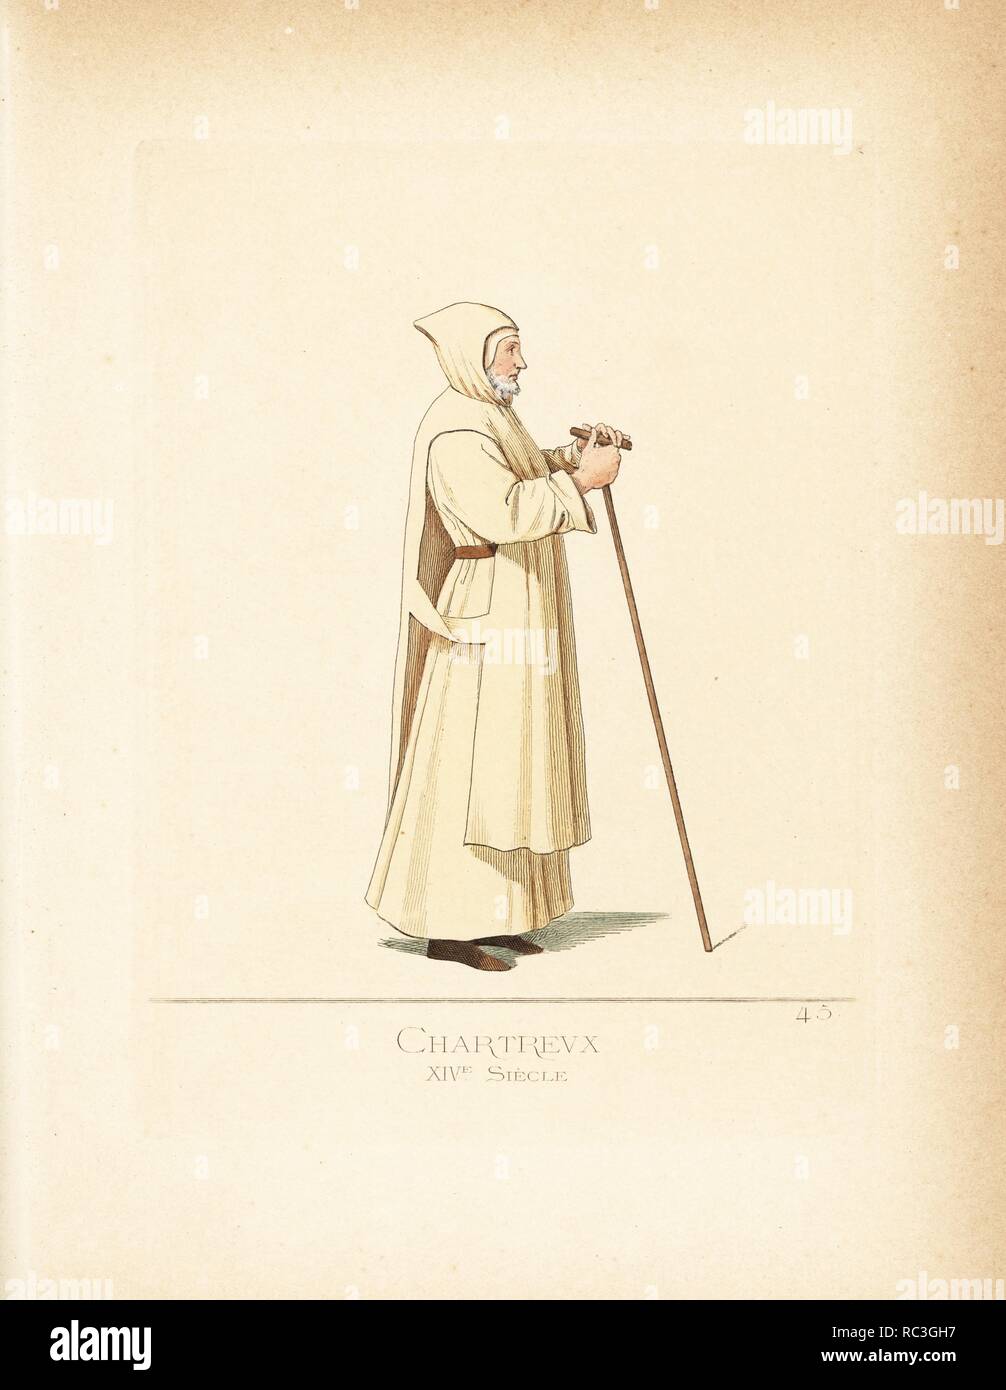 Carthusian monk, Order of Saint Bruno, 14th century. He wears a hood, cape and tunic in white linen, and holds a walking stick. From a painting by Ambrogio Lorenzetti. Handcoloured illustration drawn and lithographed by Paul Mercuri with text by Camille Bonnard from 'Historical Costumes from the 12th to 15th Centuries,' Levy Fils, Paris, 1860. Stock Photo